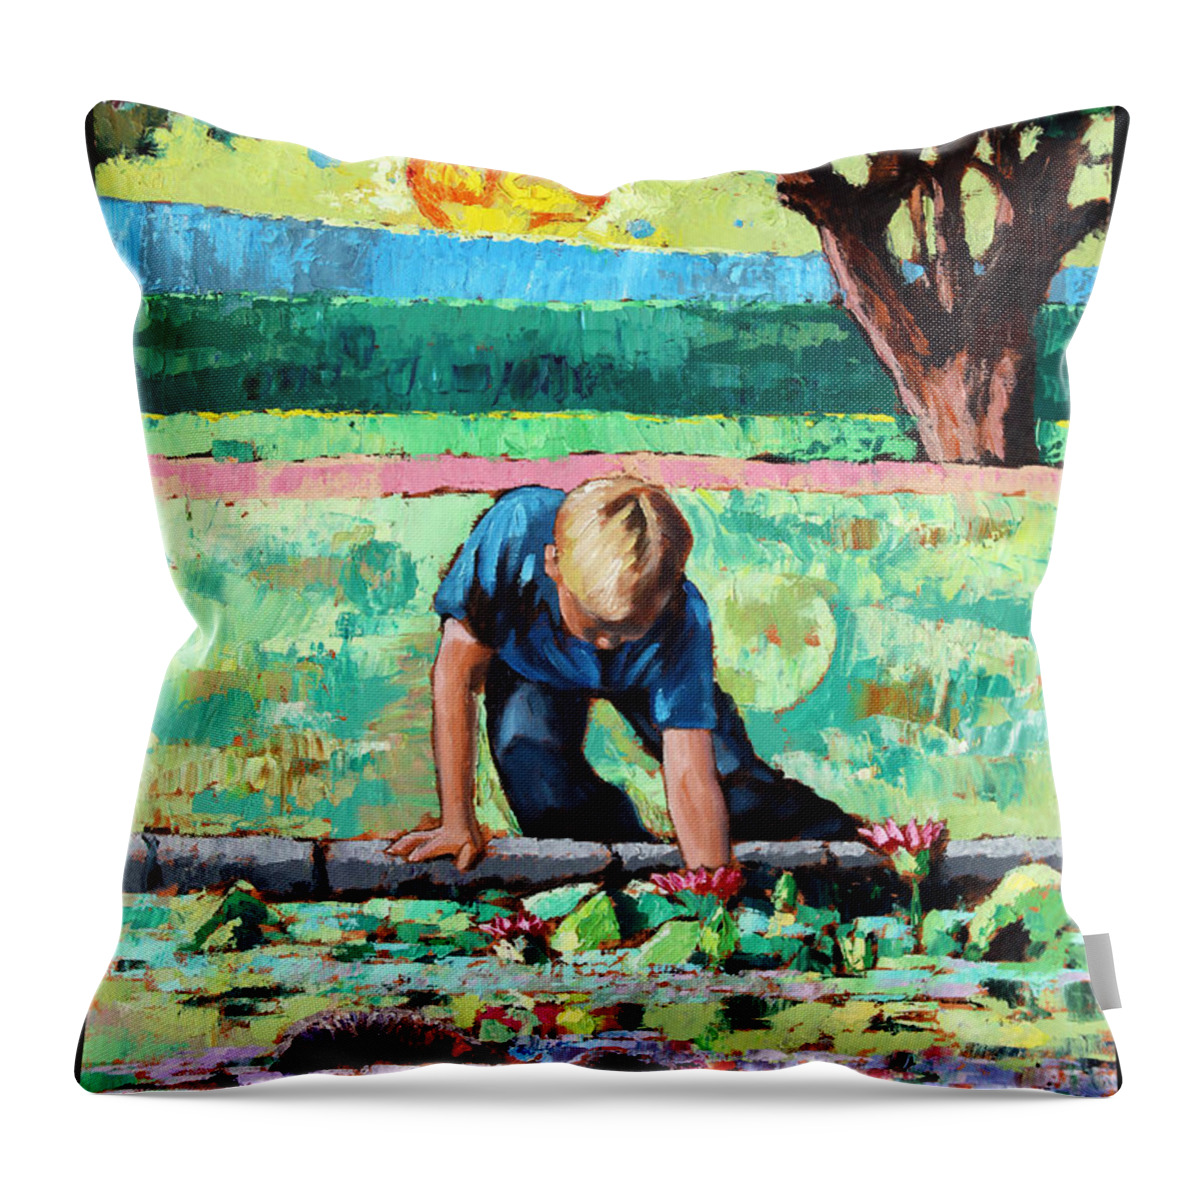 Boy Throw Pillow featuring the painting Discovering A World Of Beauty by John Lautermilch